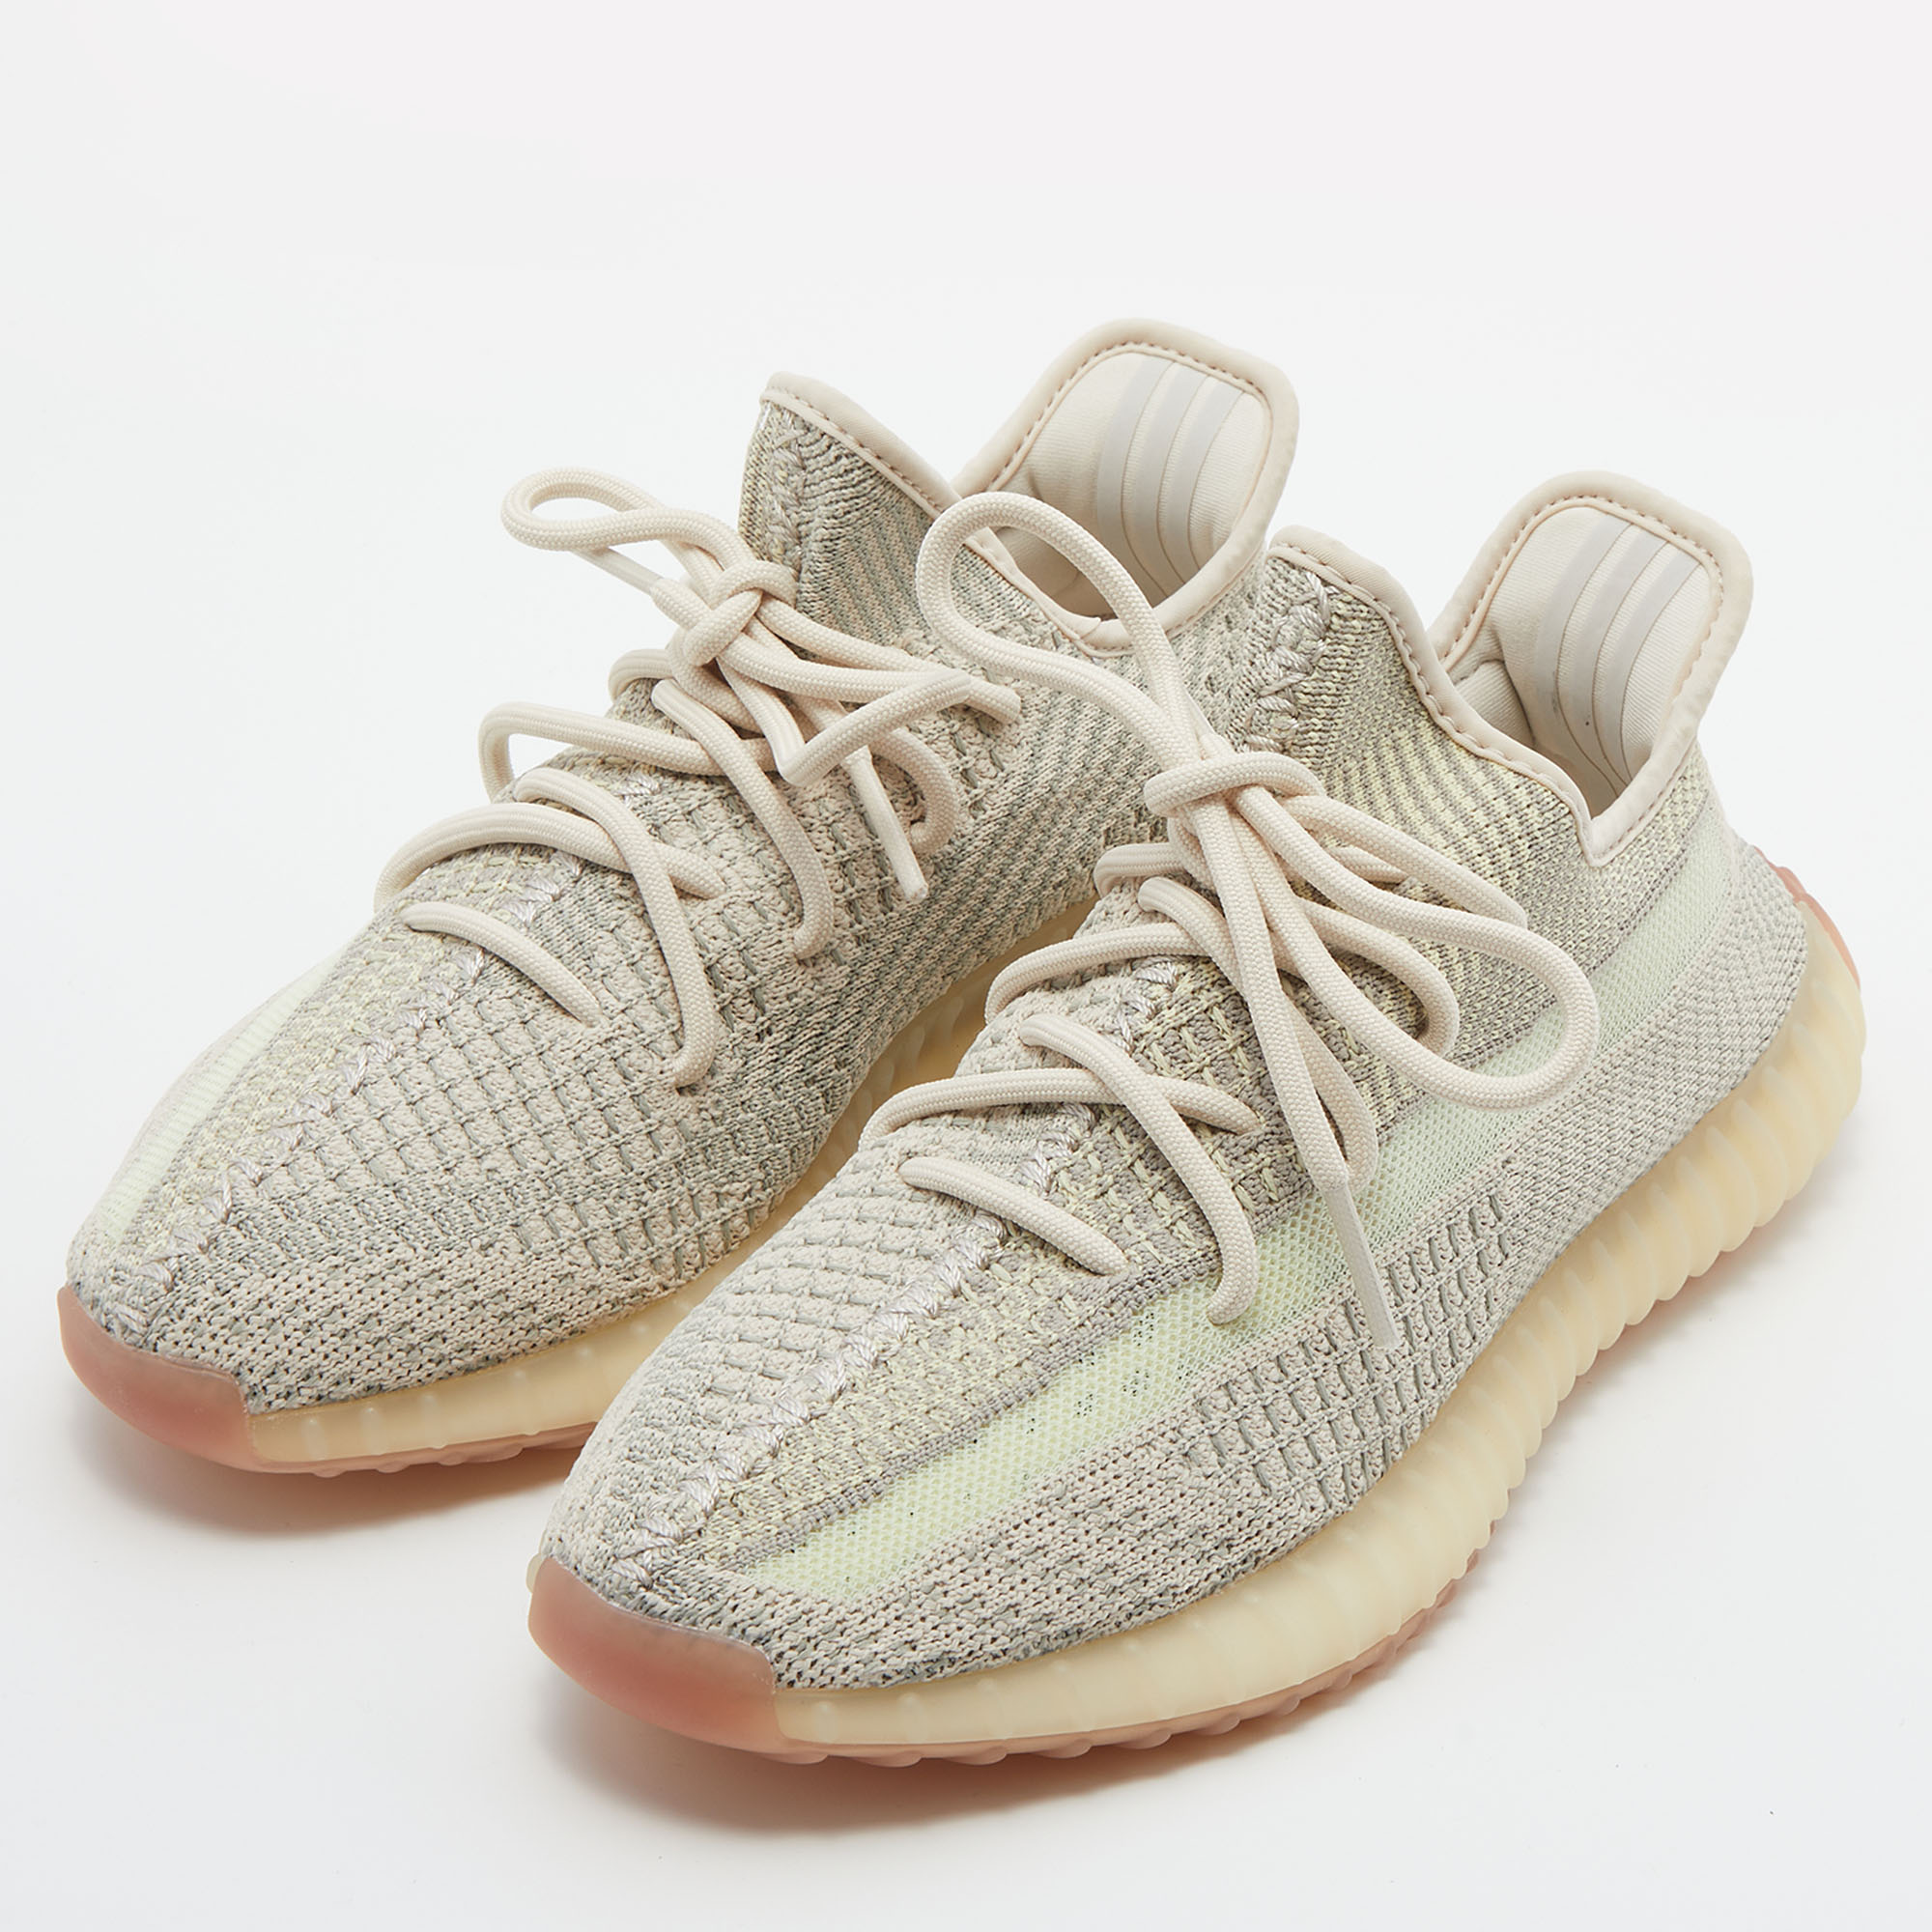 

Yeezy x Adidas Citrin Knit Fabric Boost 350 V2 Non-Reflective Sneakers Size 39 1/3, Green